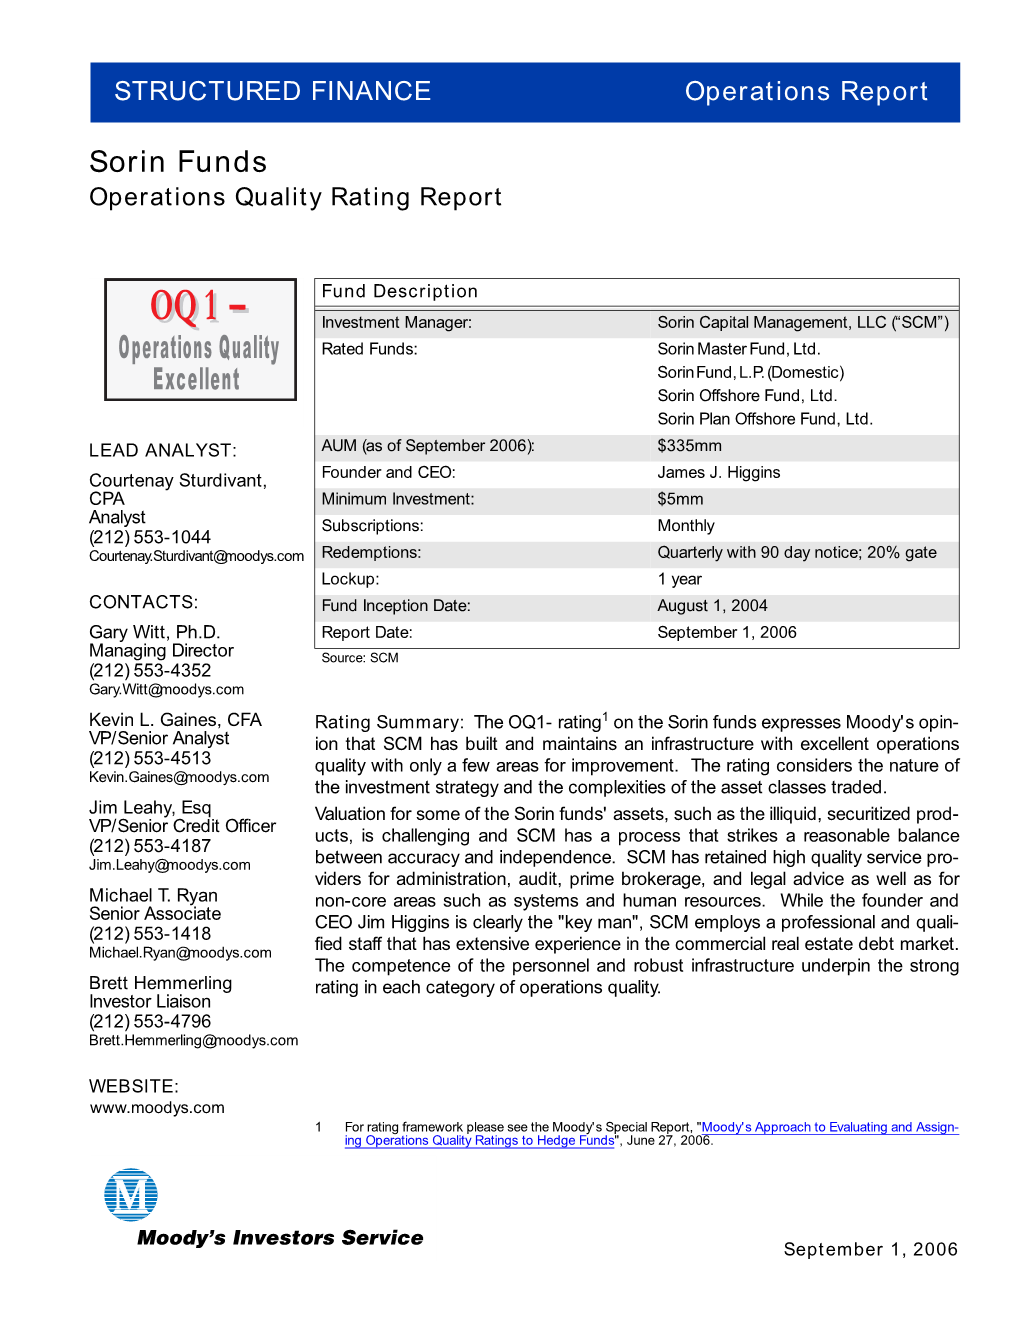 Sorin Funds Operations Quality Rating Report